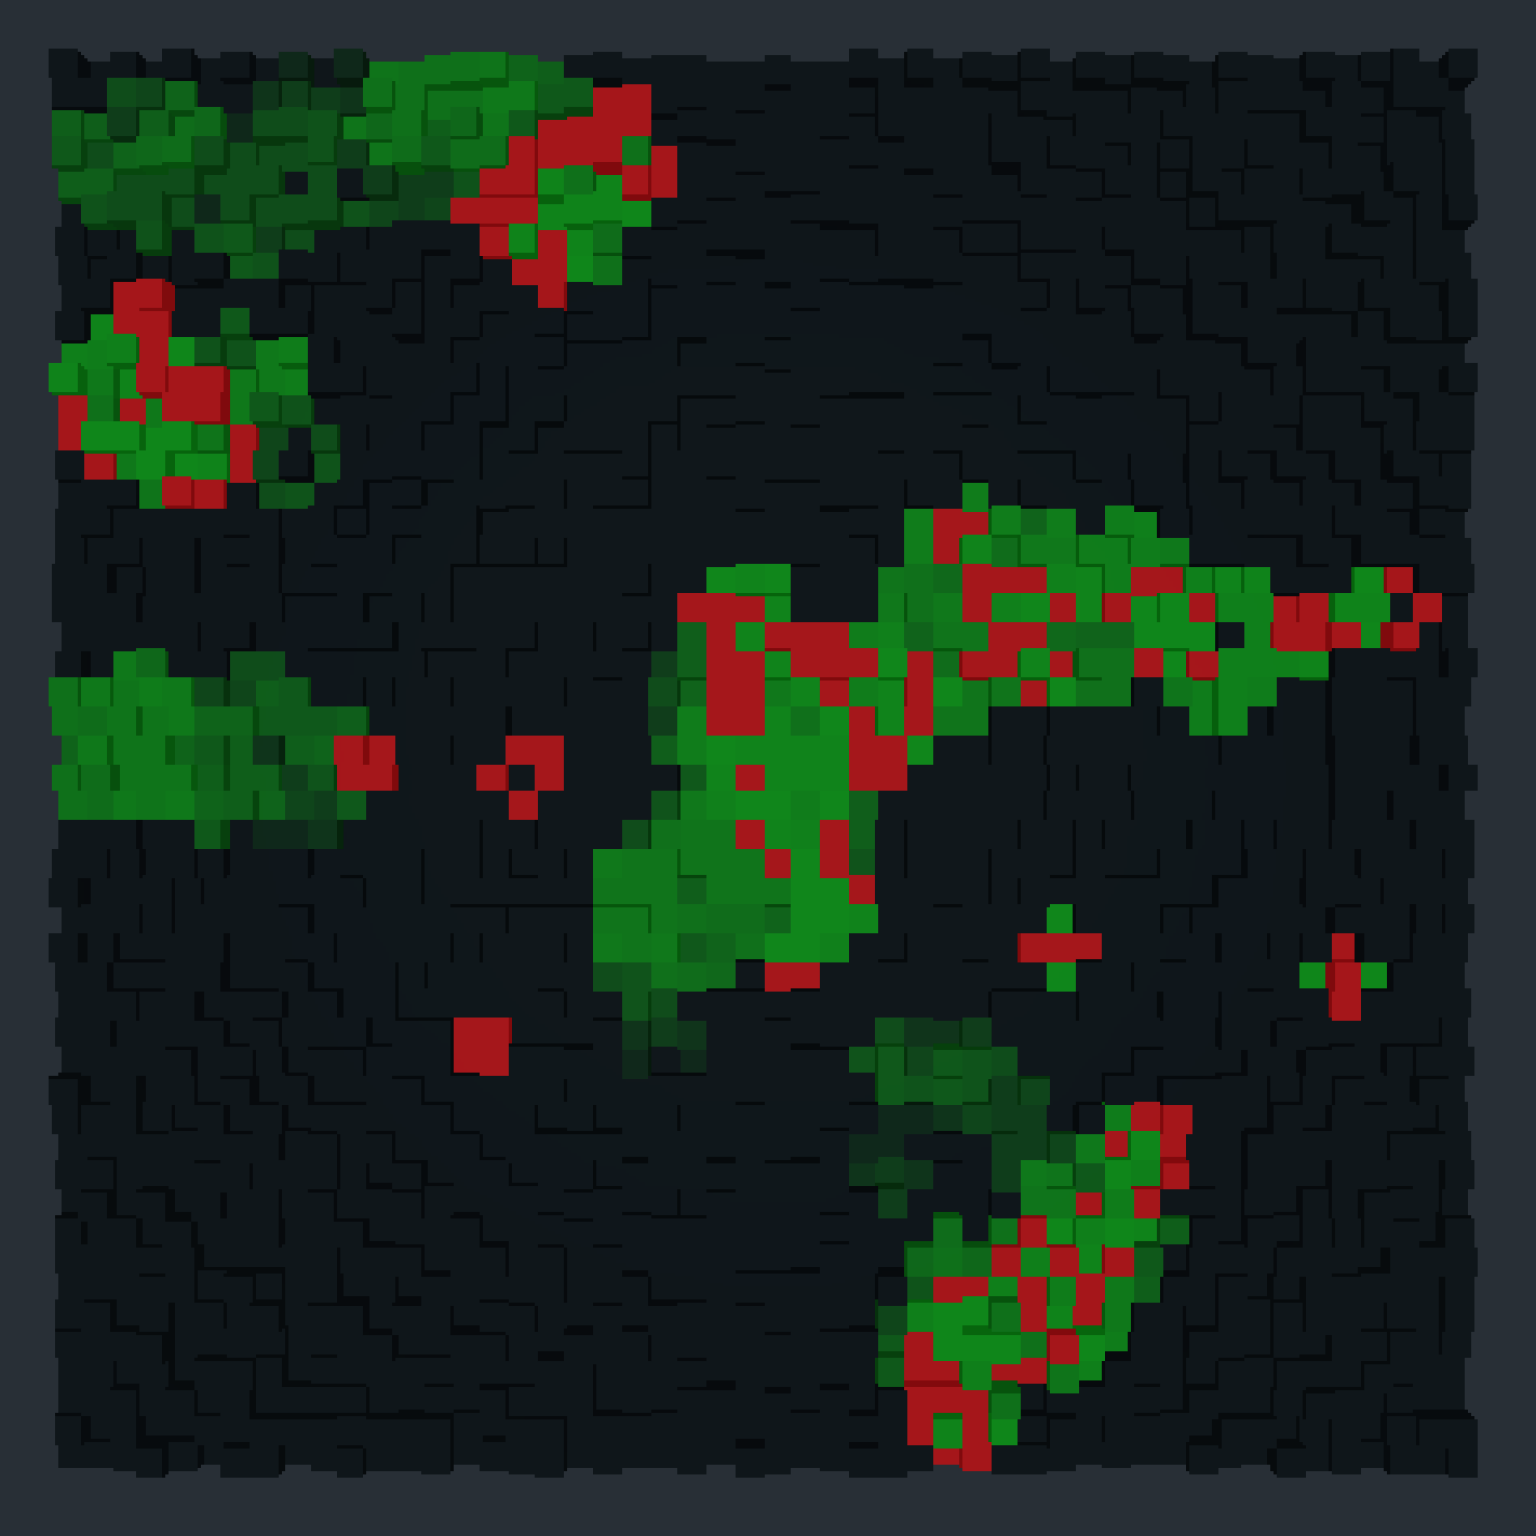 conways game of life infinite colony